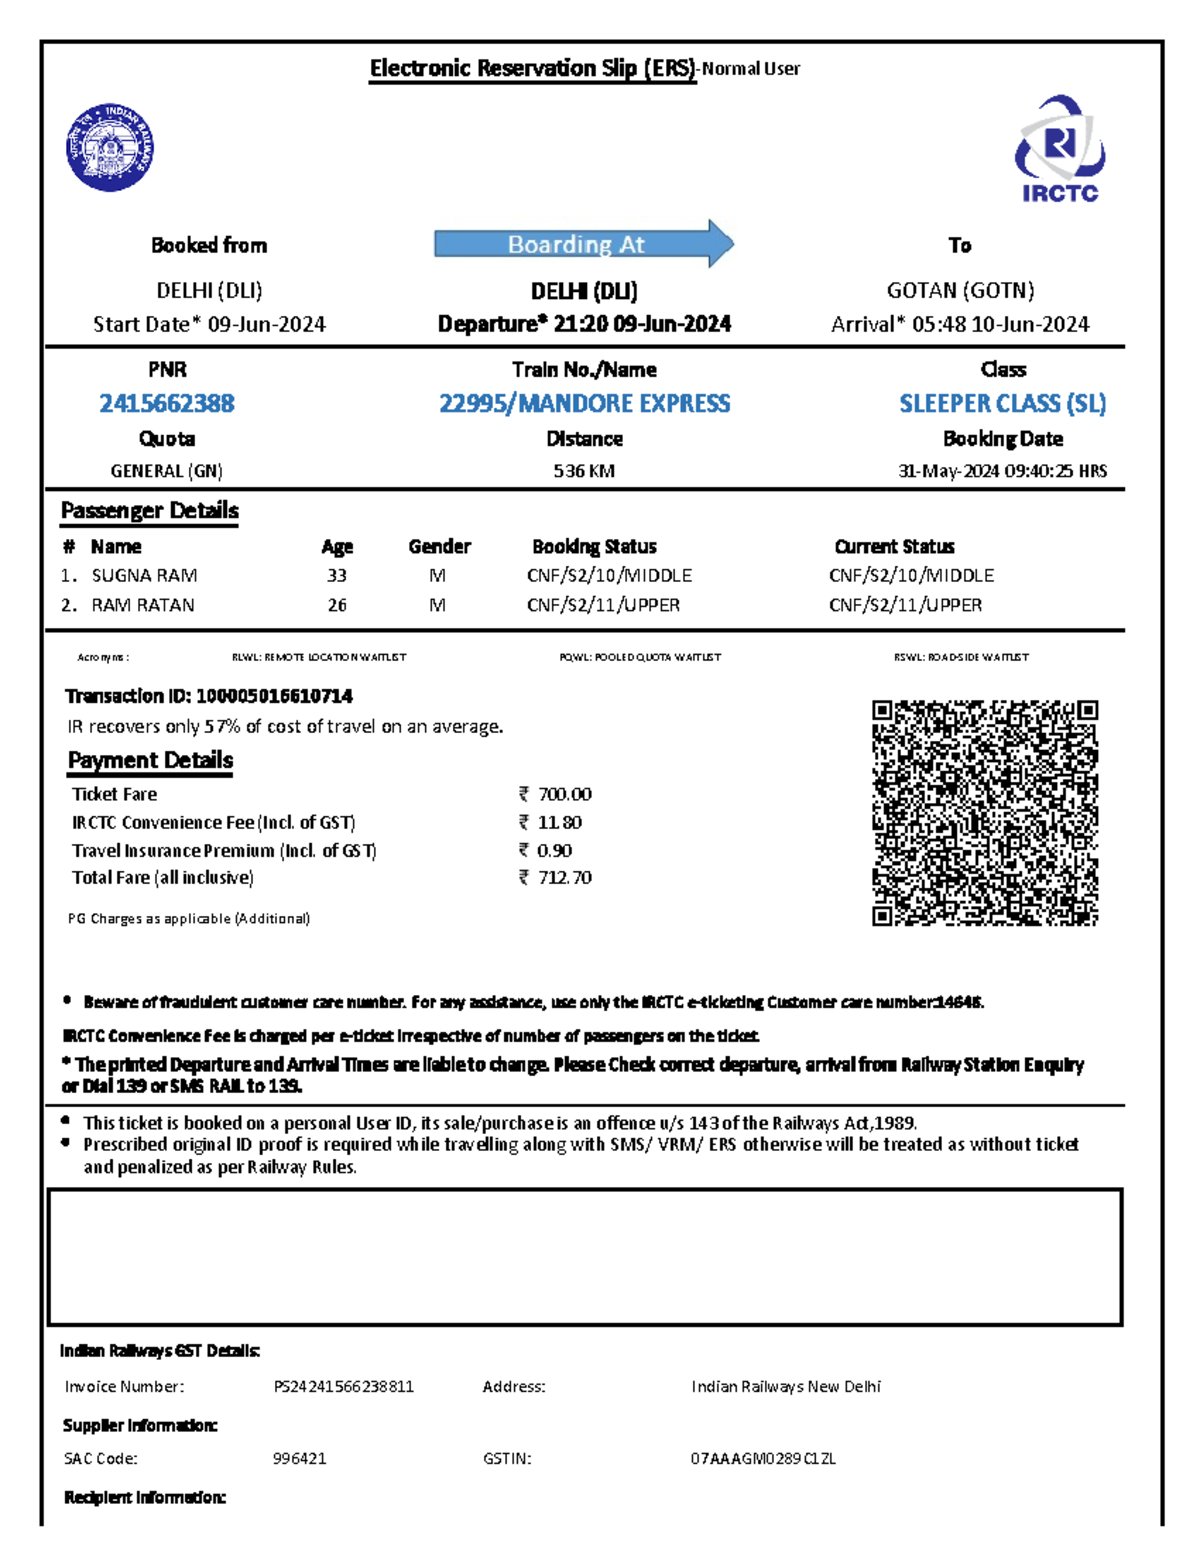 2415662388 - Notes - Electronic Reservation Slip (ERS)-Normal User 